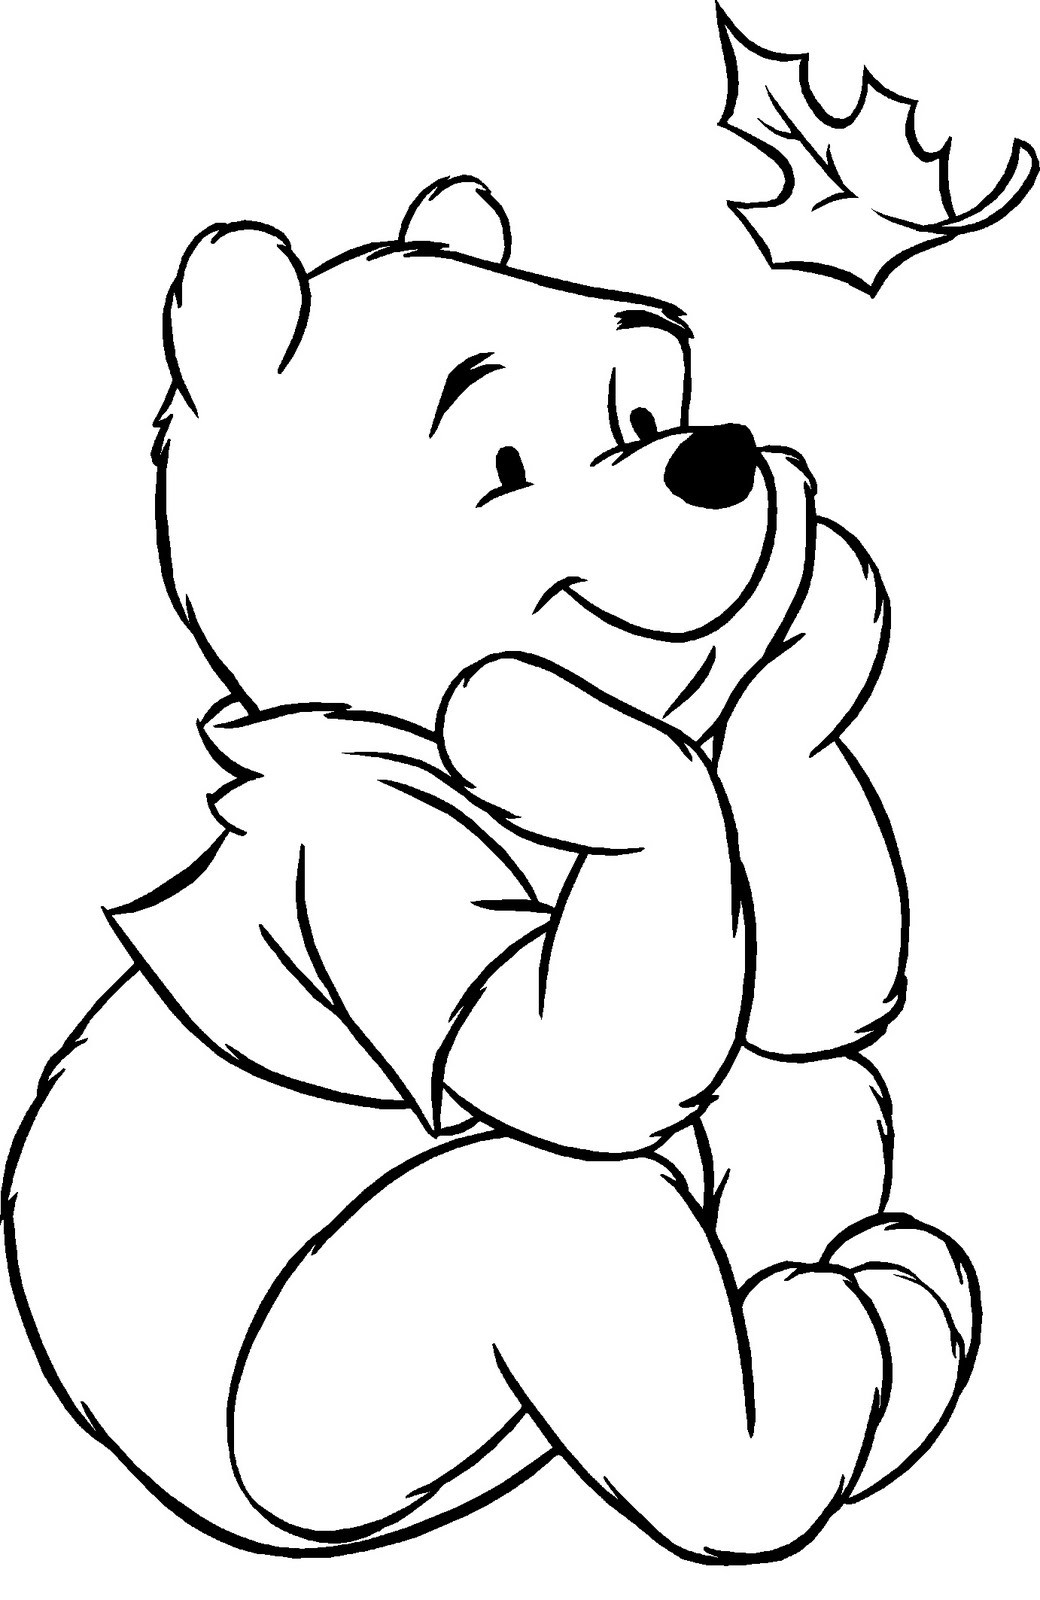 Winnie The Pooh Printable Coloring Pages
 Winnie The Pooh Thanksgiving Coloring Pages